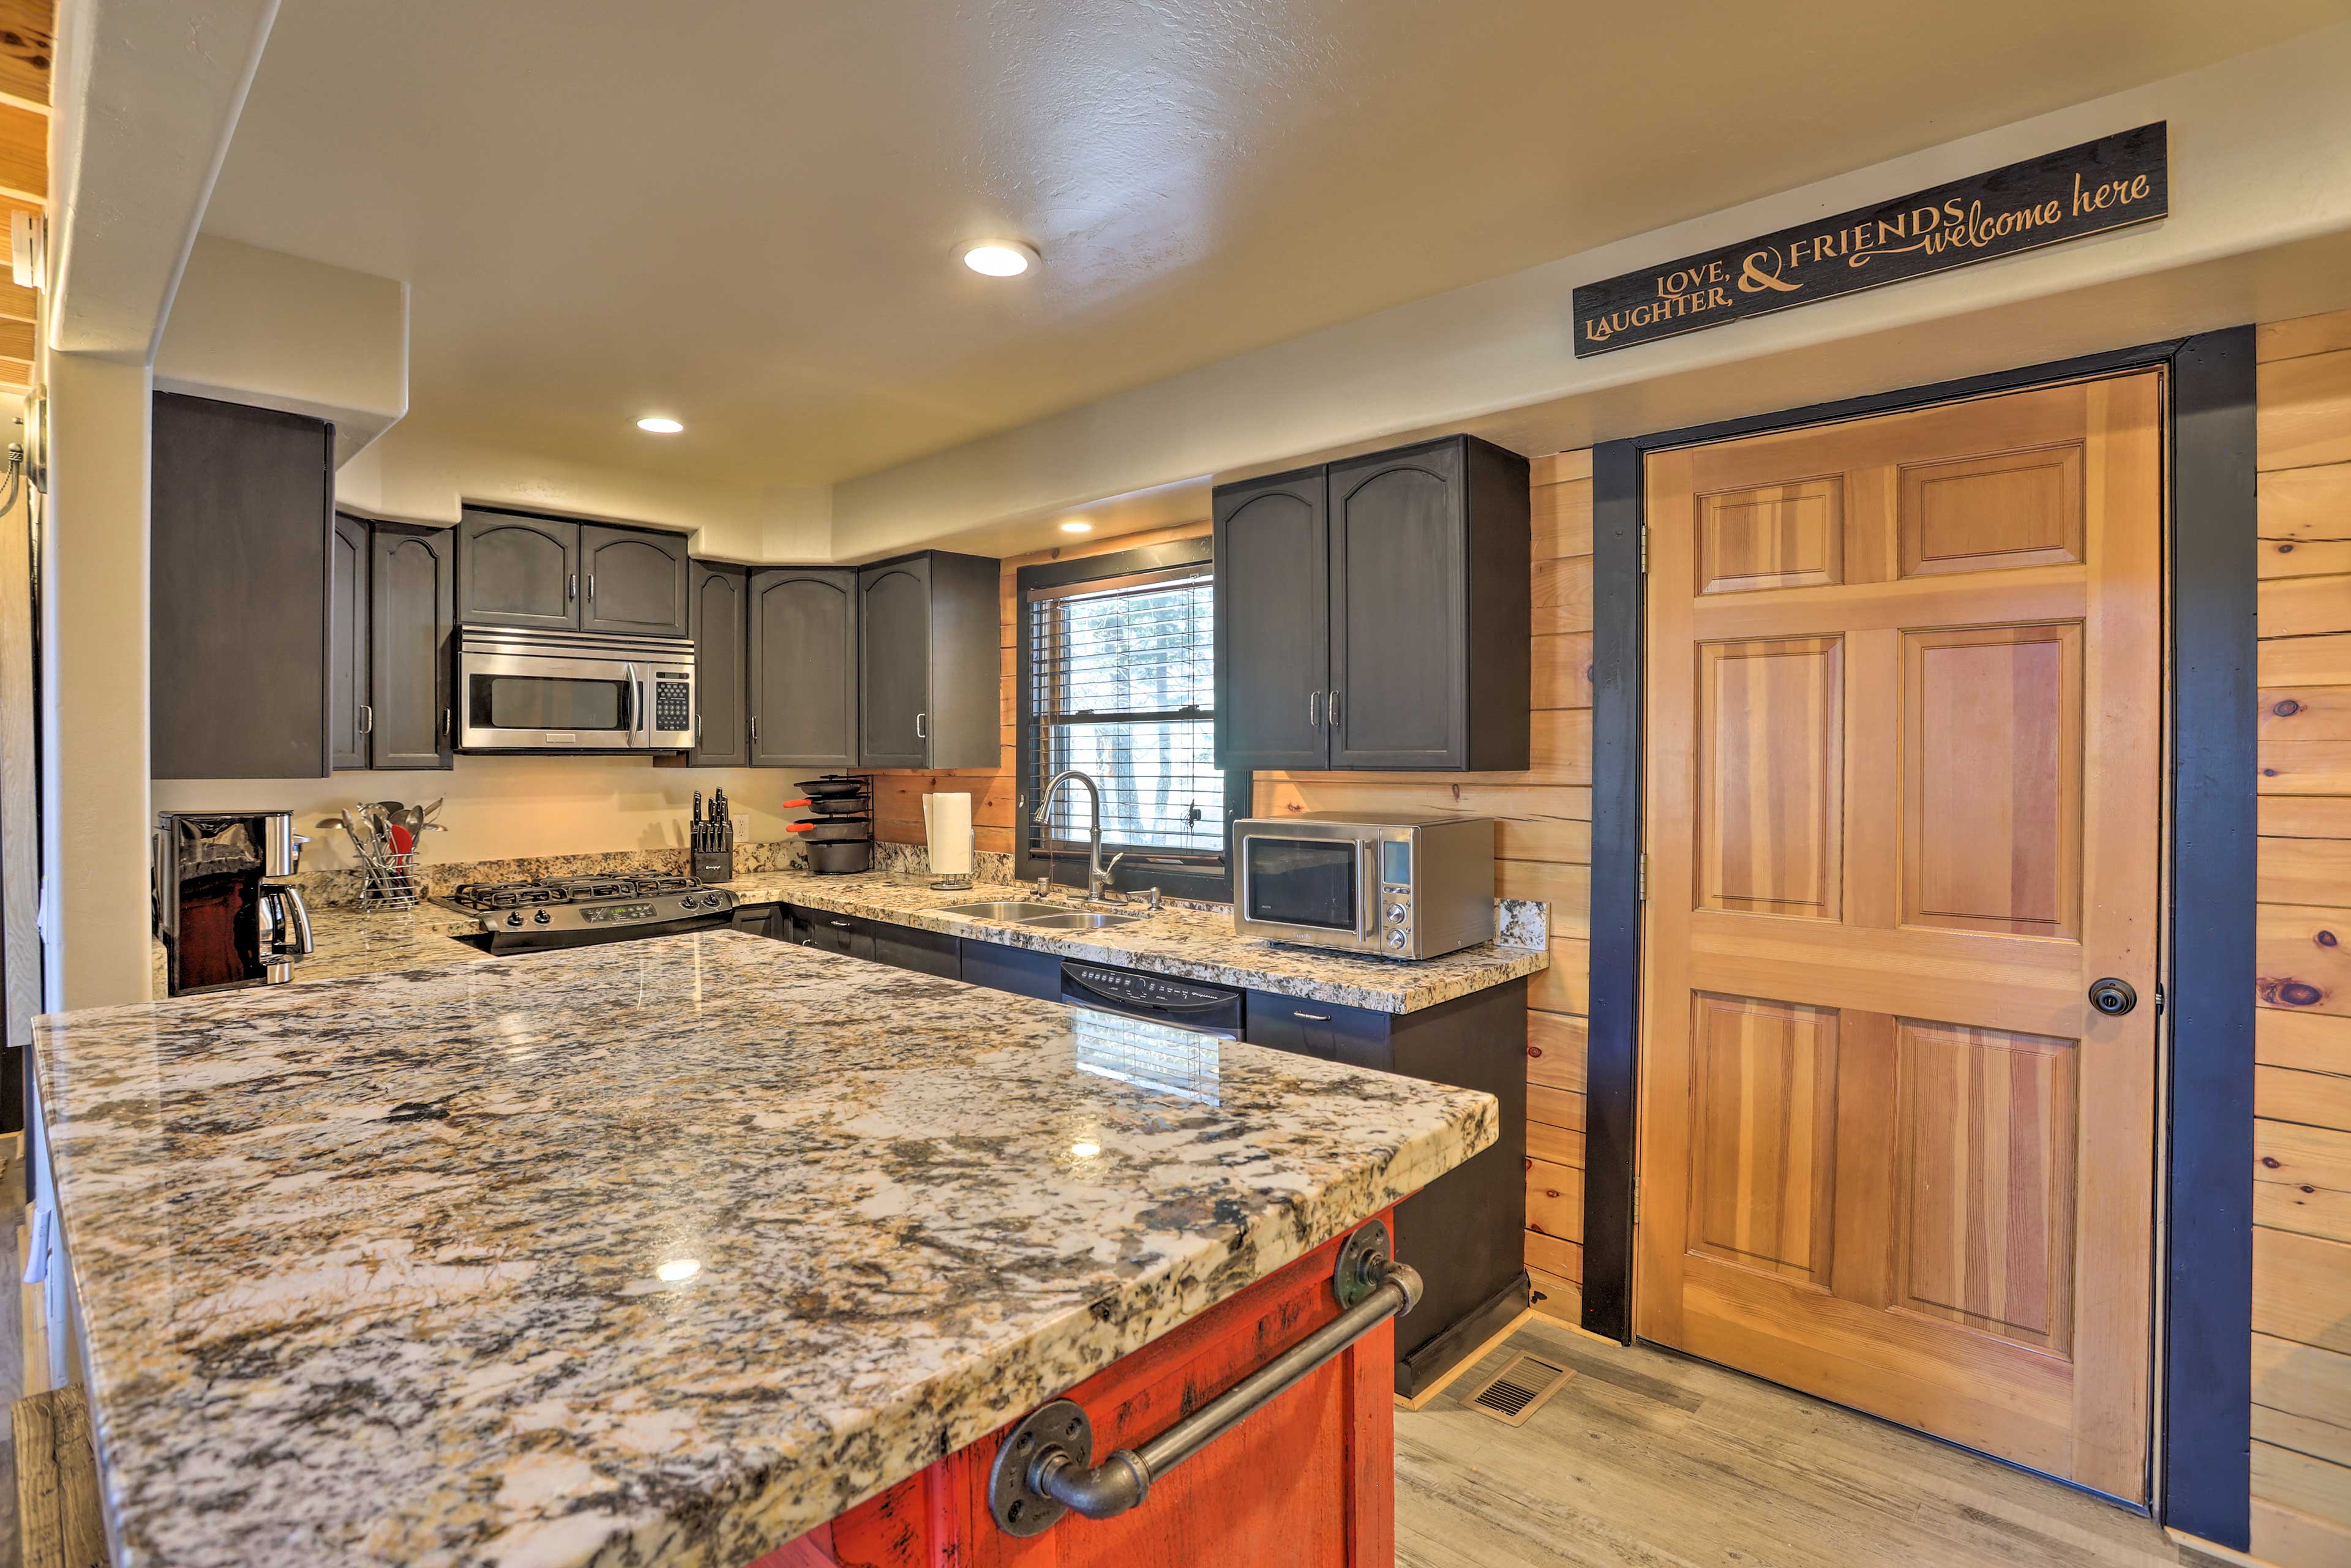 Kitchen | Fully Equipped | Stainless Steel Appliances | Dishware & Glassware